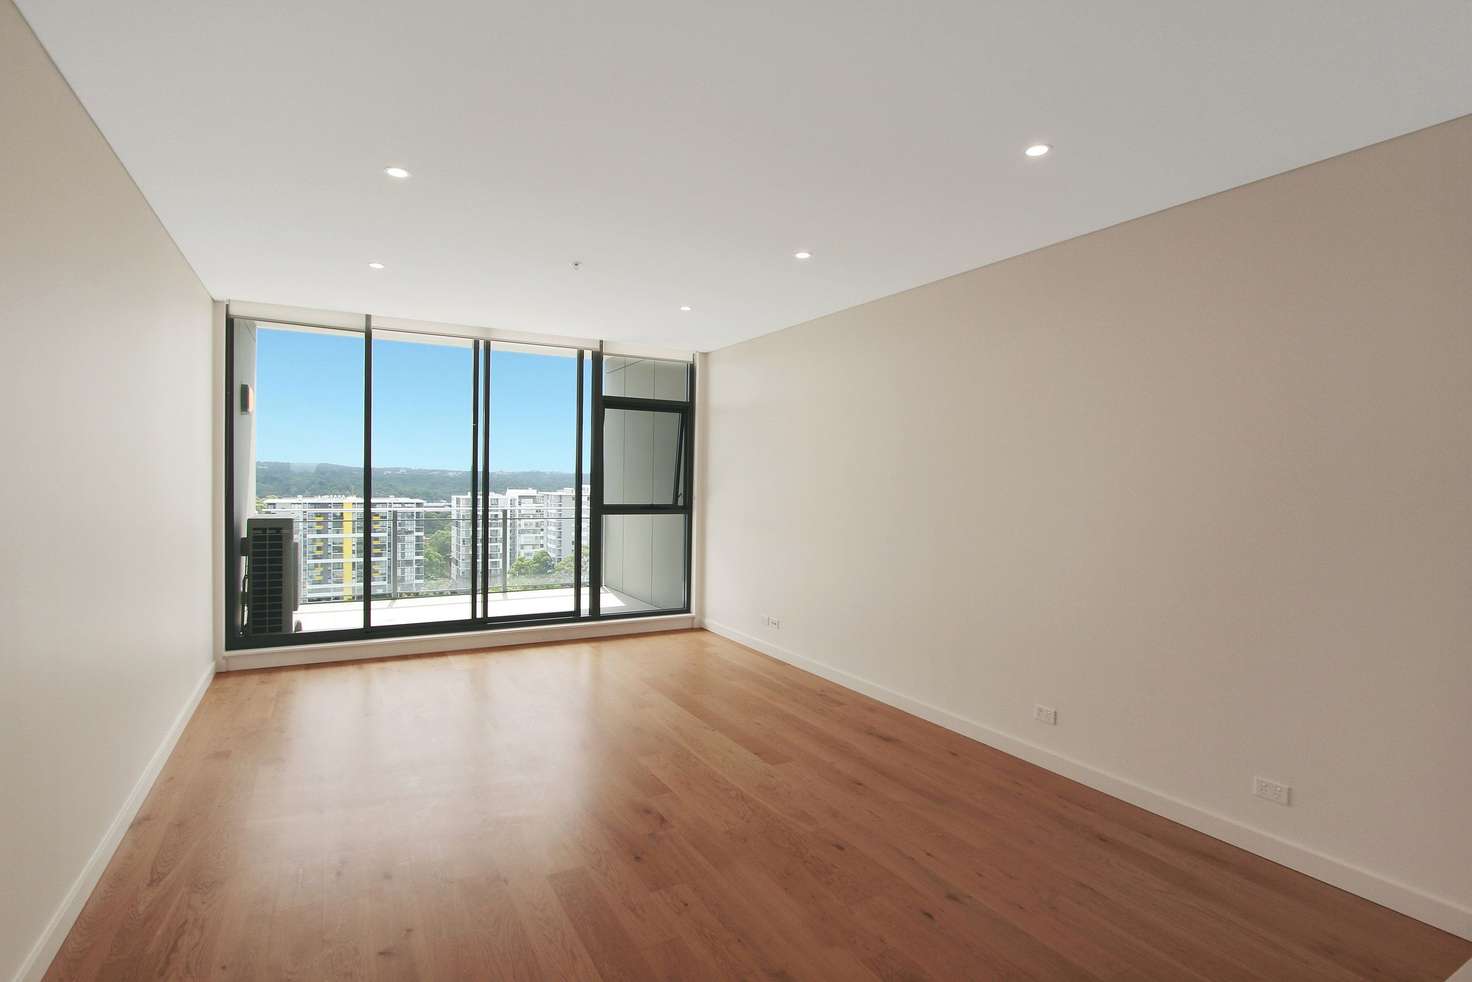 Main view of Homely apartment listing, 1308/5 Mooltan Avenue, Macquarie Park NSW 2113